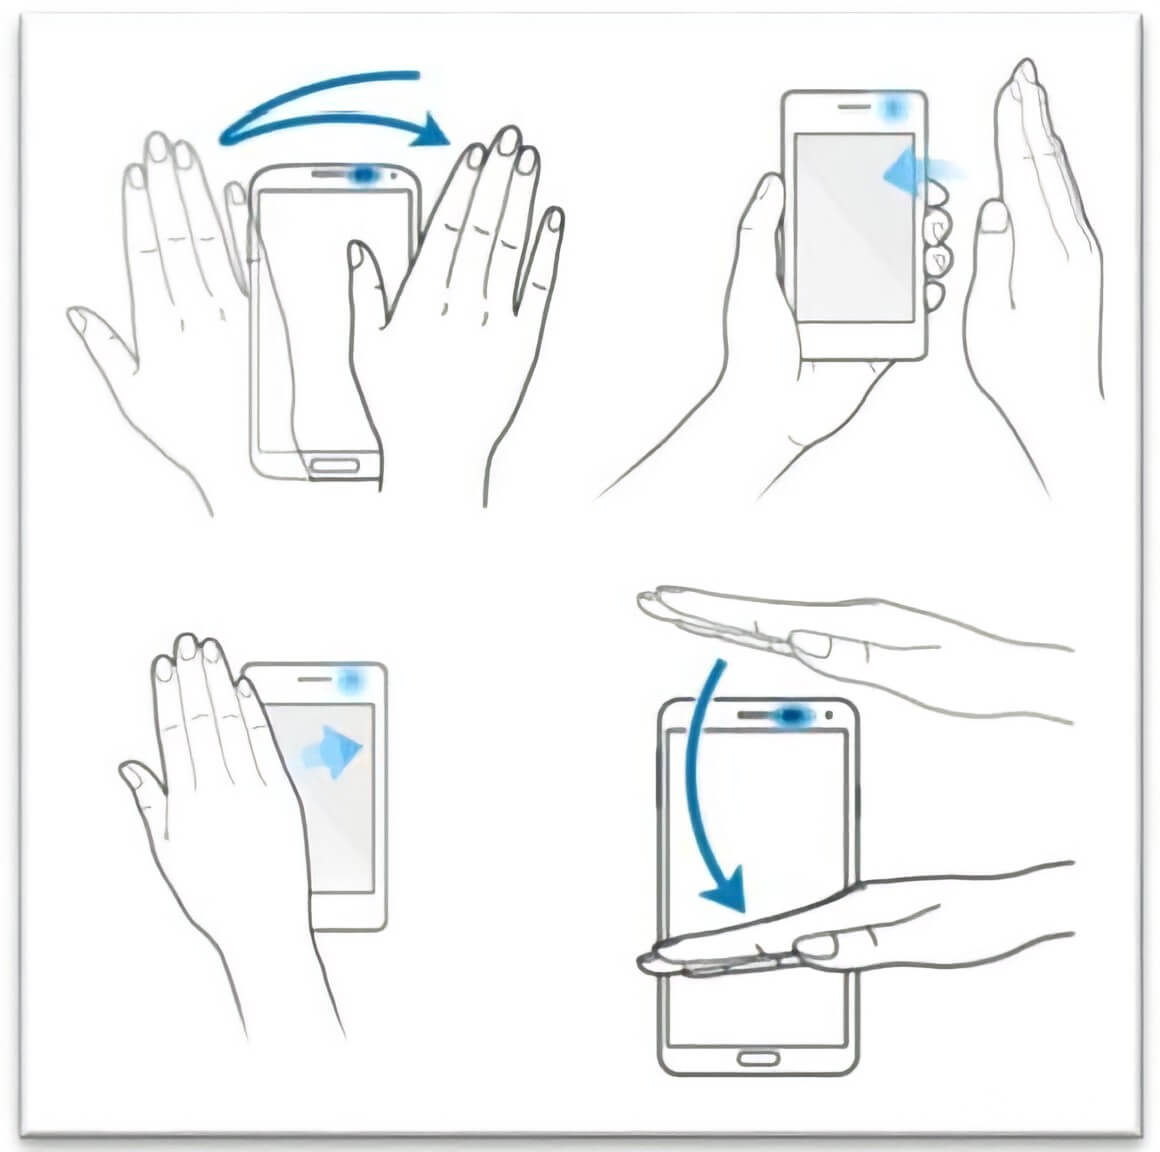 Air Gesture Control is a touchless mechanism to allow users to operate their devices with their bodies and air movements